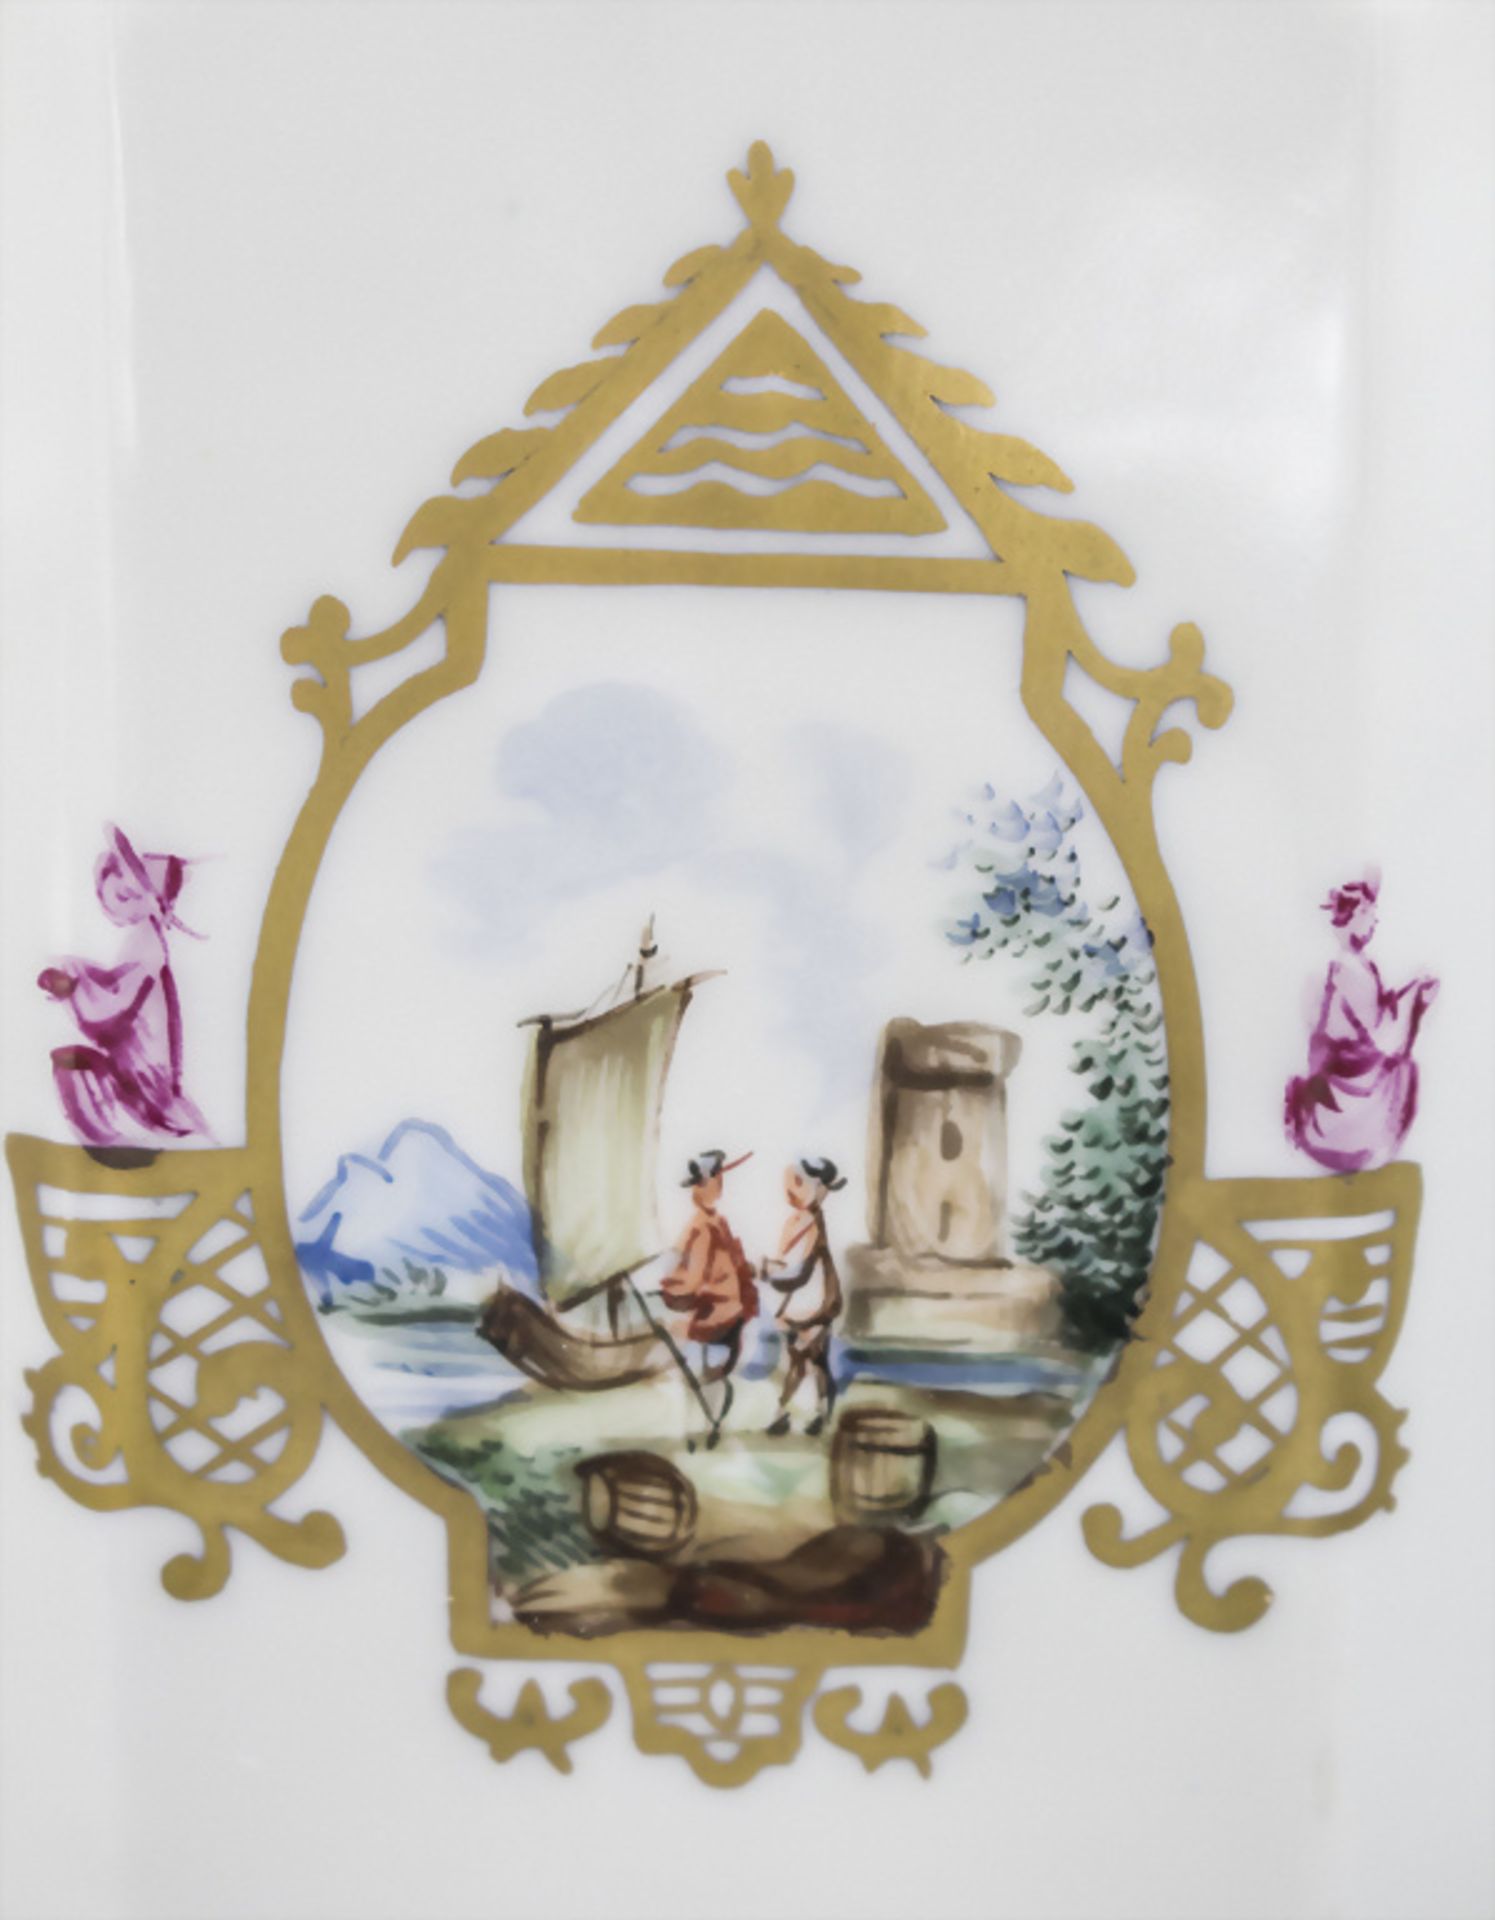 Teedose mit Chinoiserien / A tea caddy with Chinoiserie scenes, Carl Thieme, Potschappel, nach 1900 - Image 8 of 8